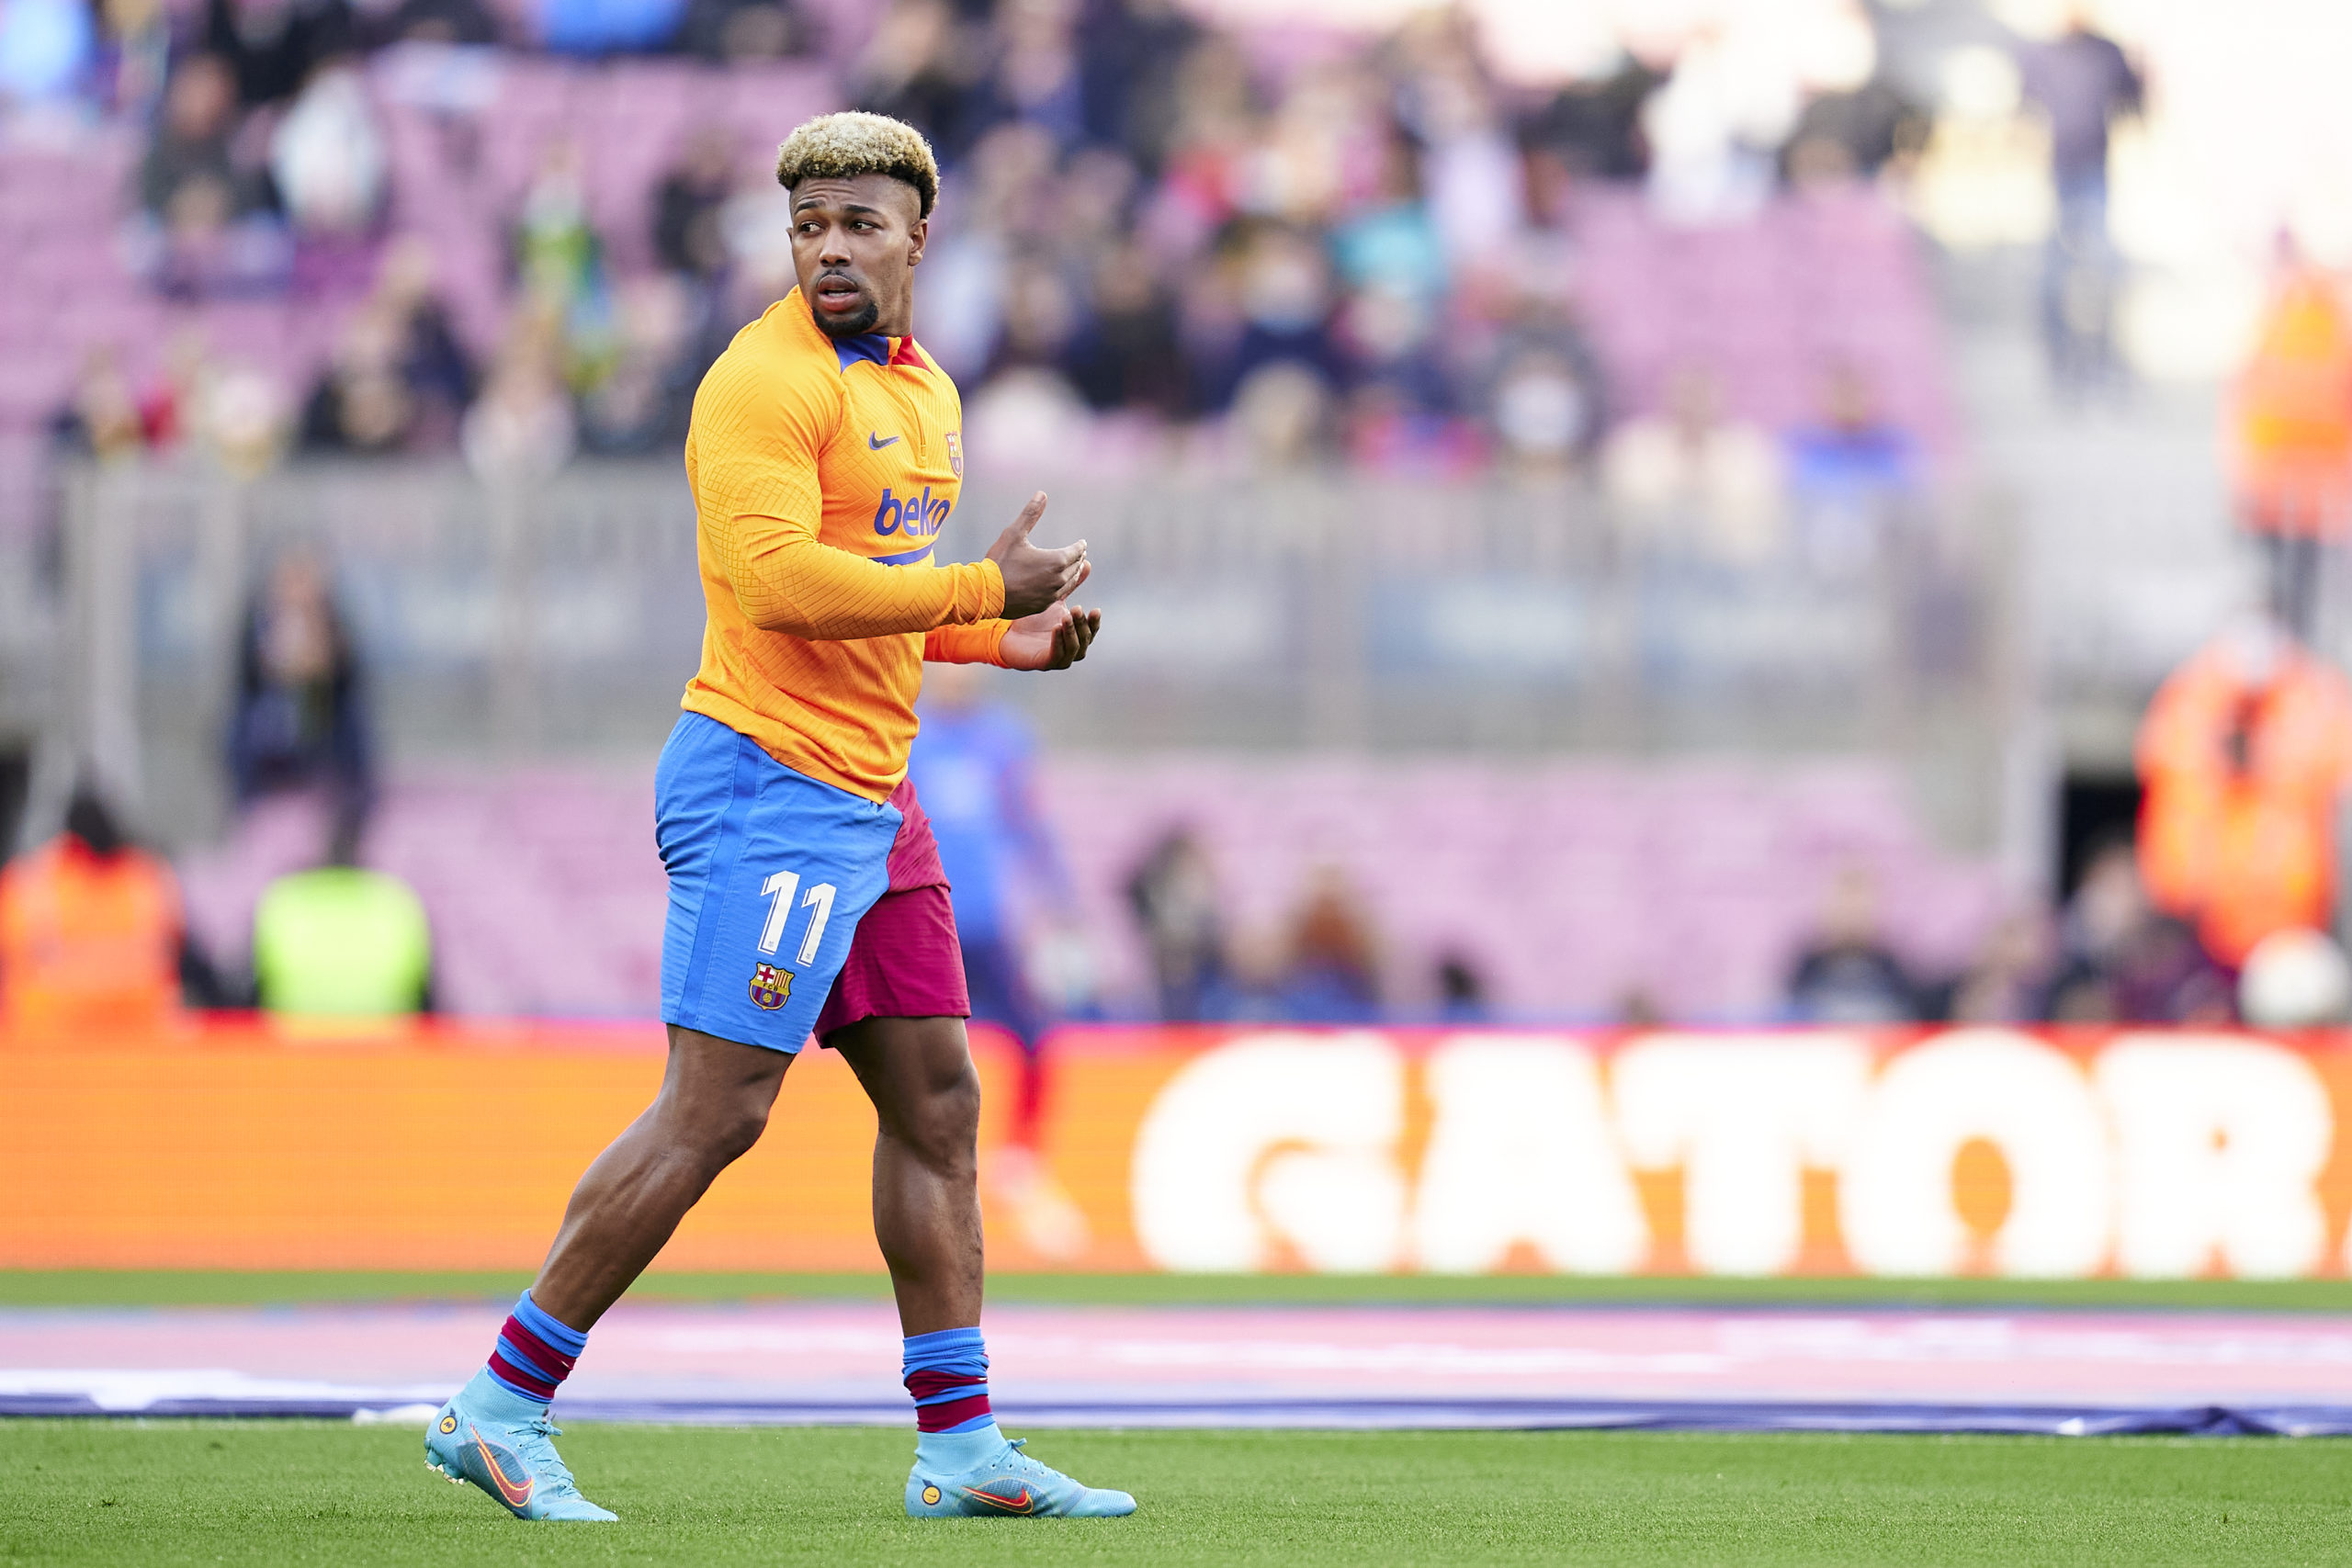 How Wolves loanee Adama Traore got on for Barcelona today